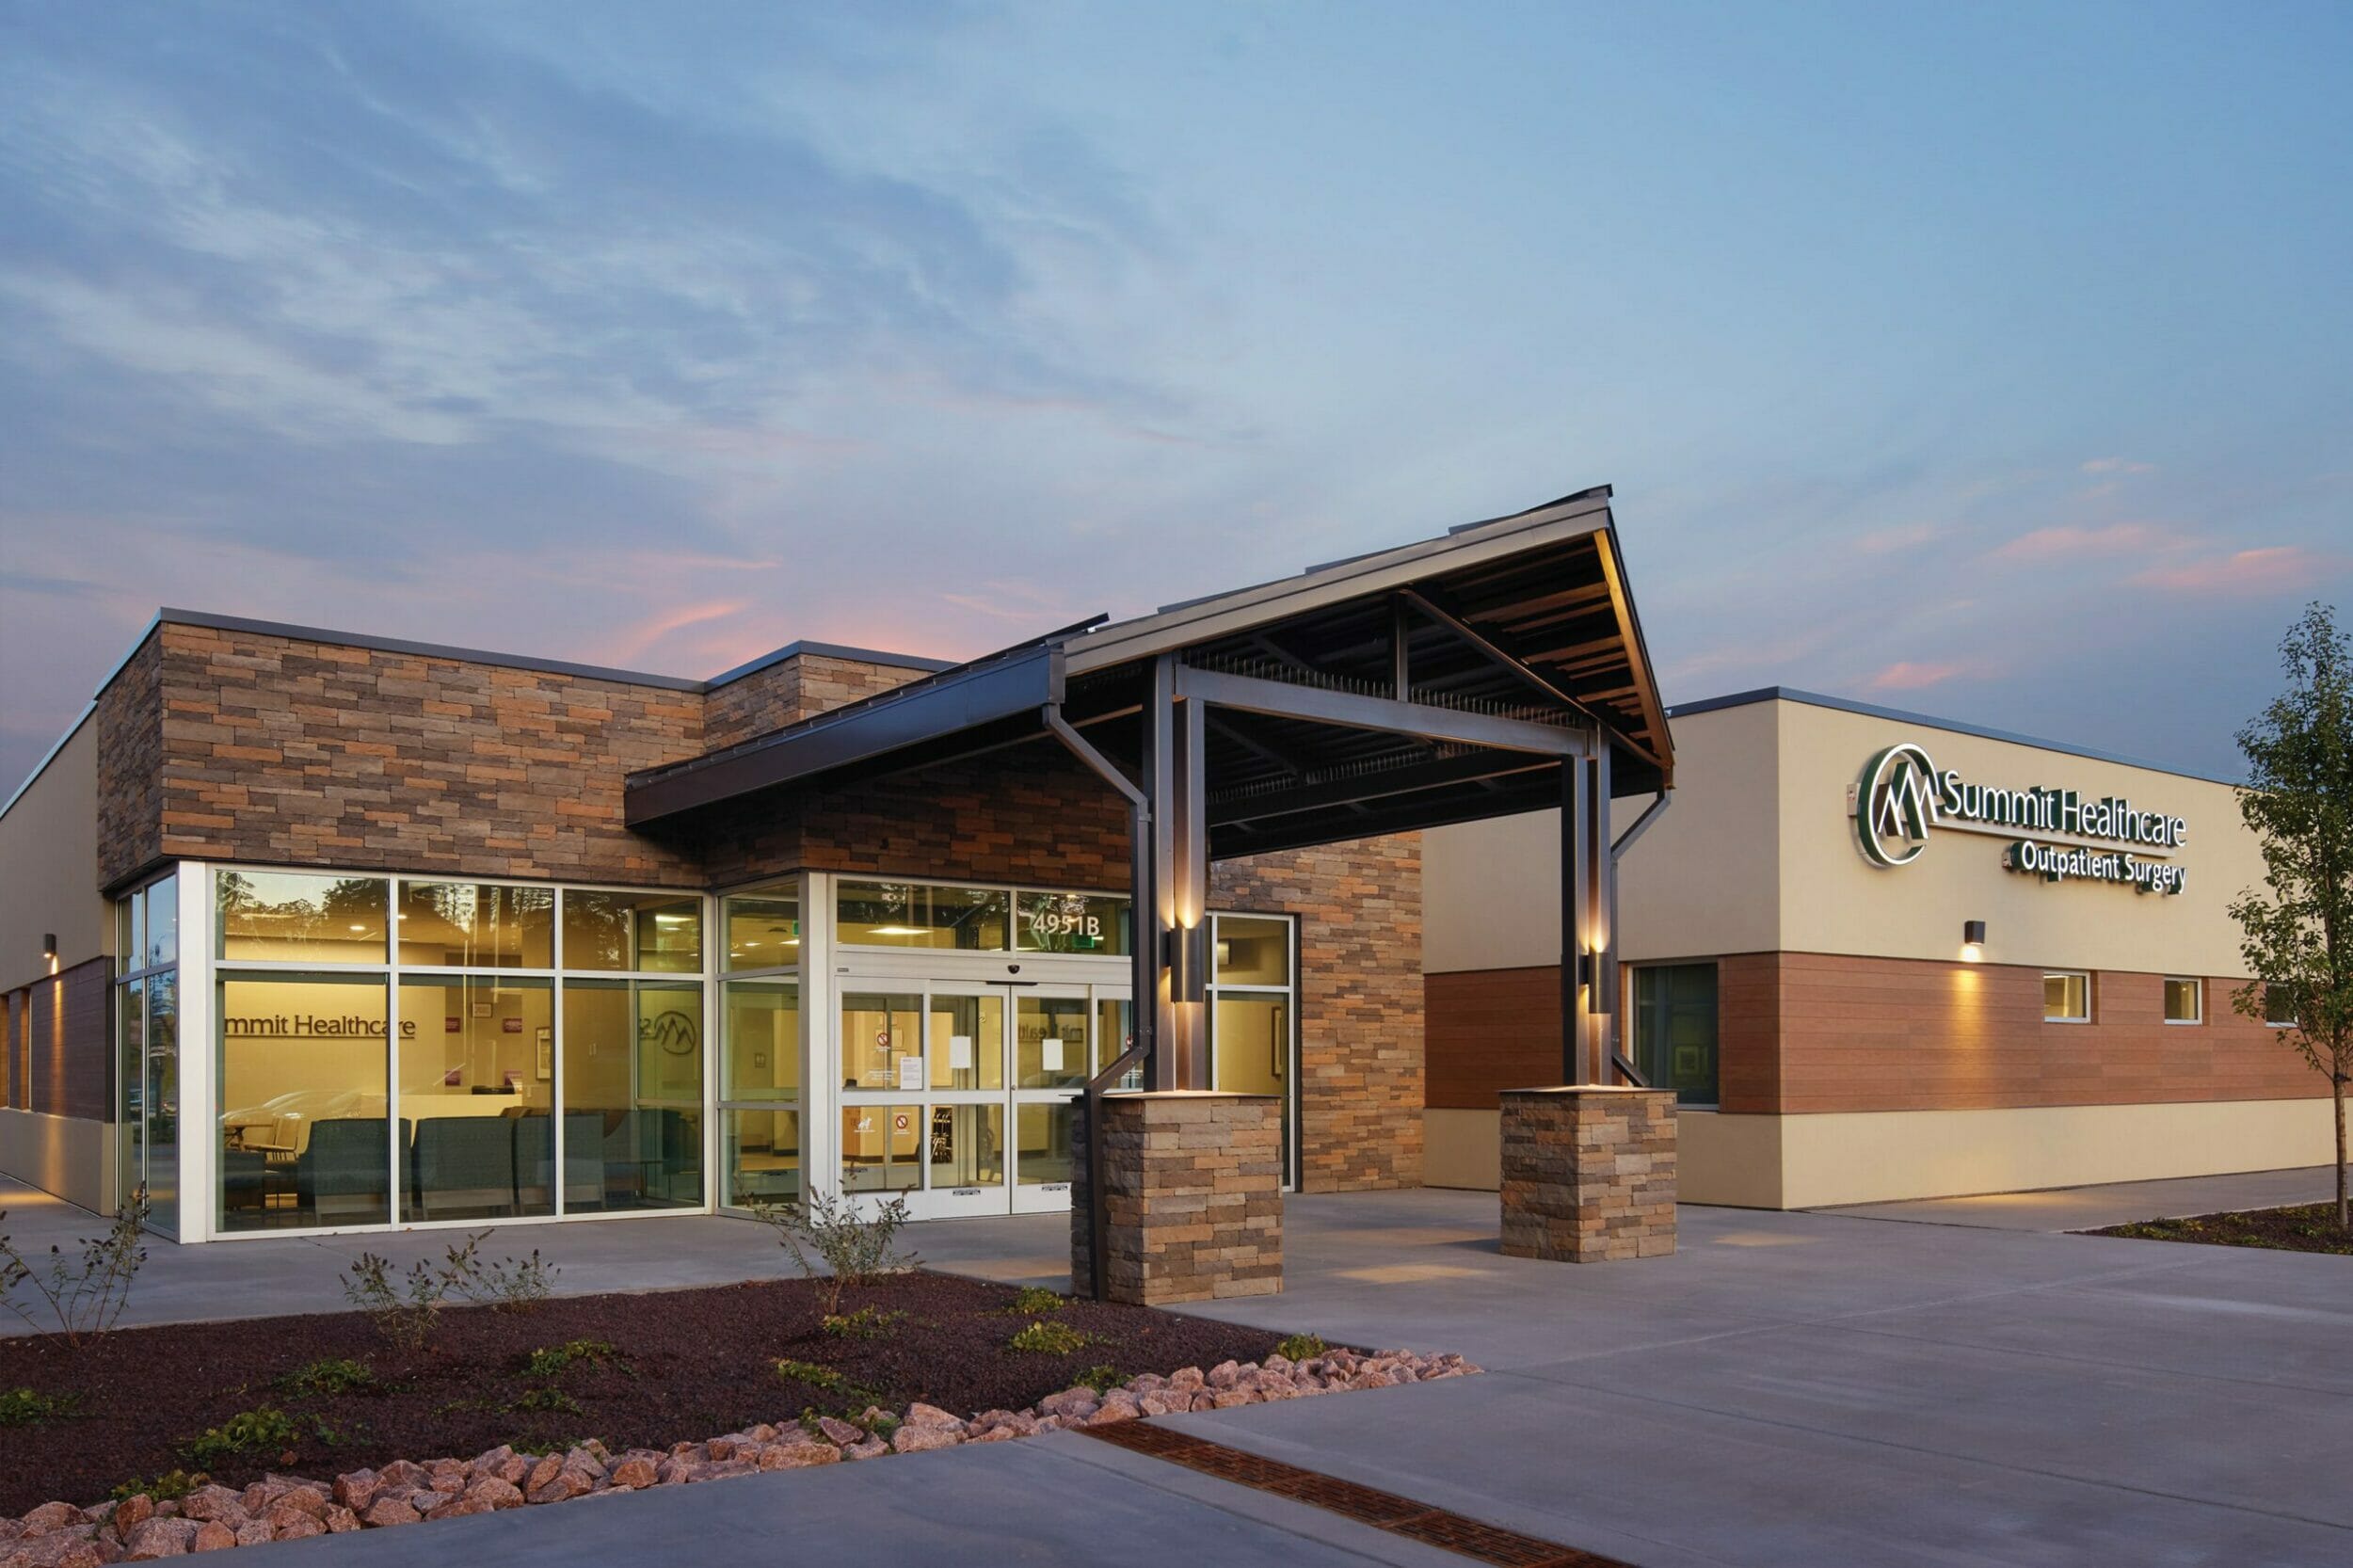 Exterior entrance to Summit Healthcare Ambulatory Surgery Center, 1-story with tan stucco and rock wall accents